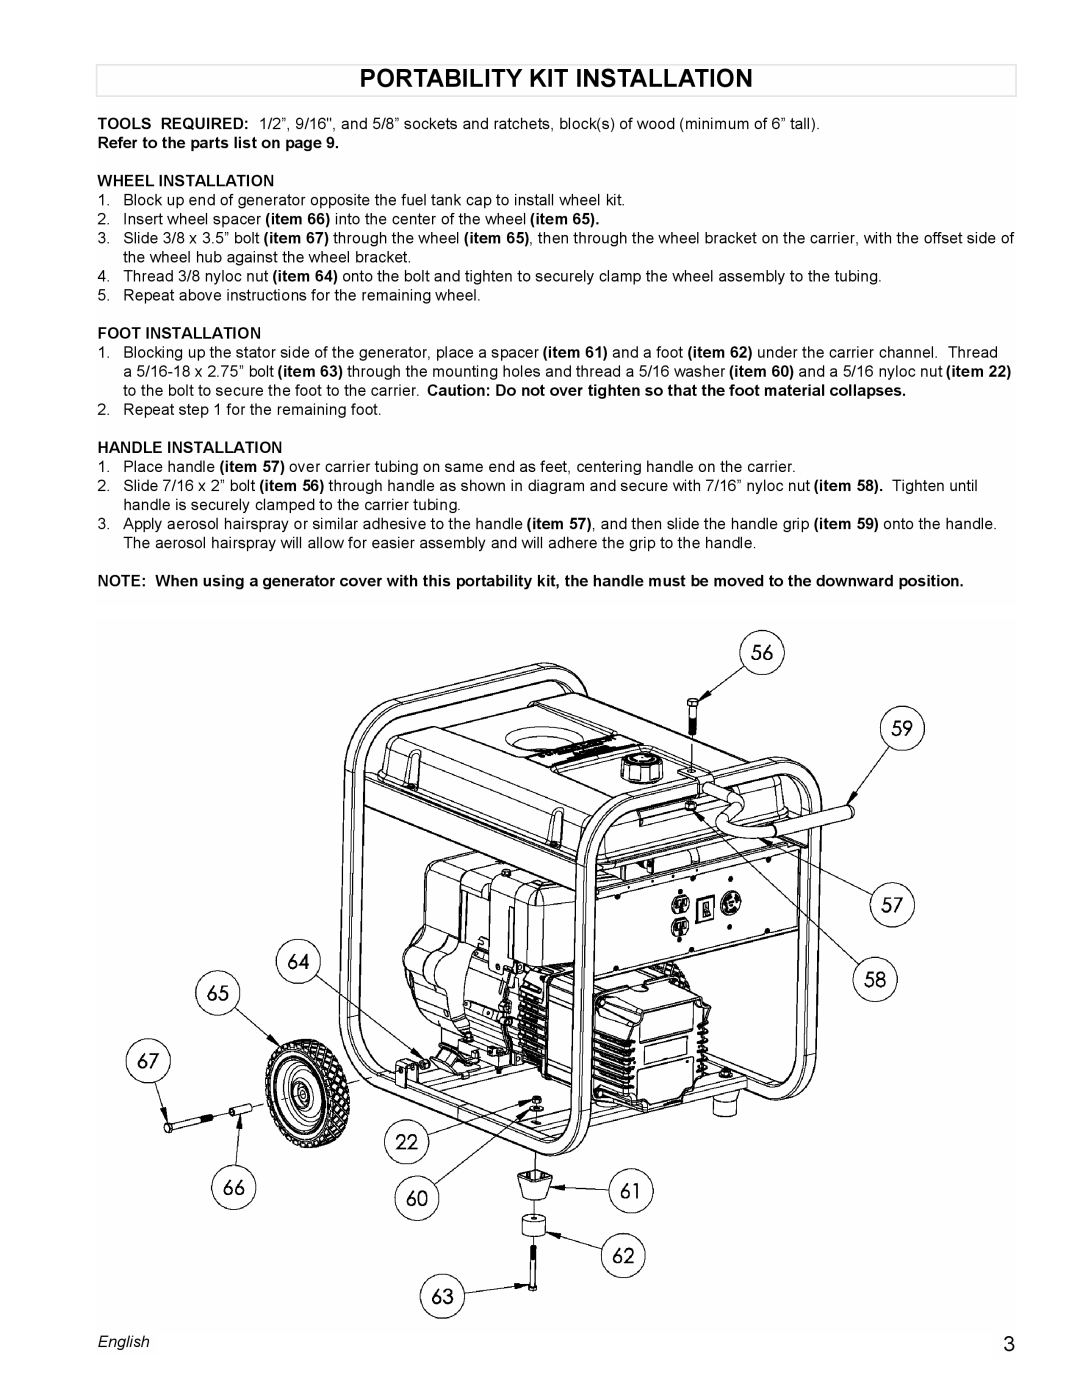 Powermate PC0525305 Portability Kit Installation, Refer to the parts list on page, Wheel Installation, Foot Installation 